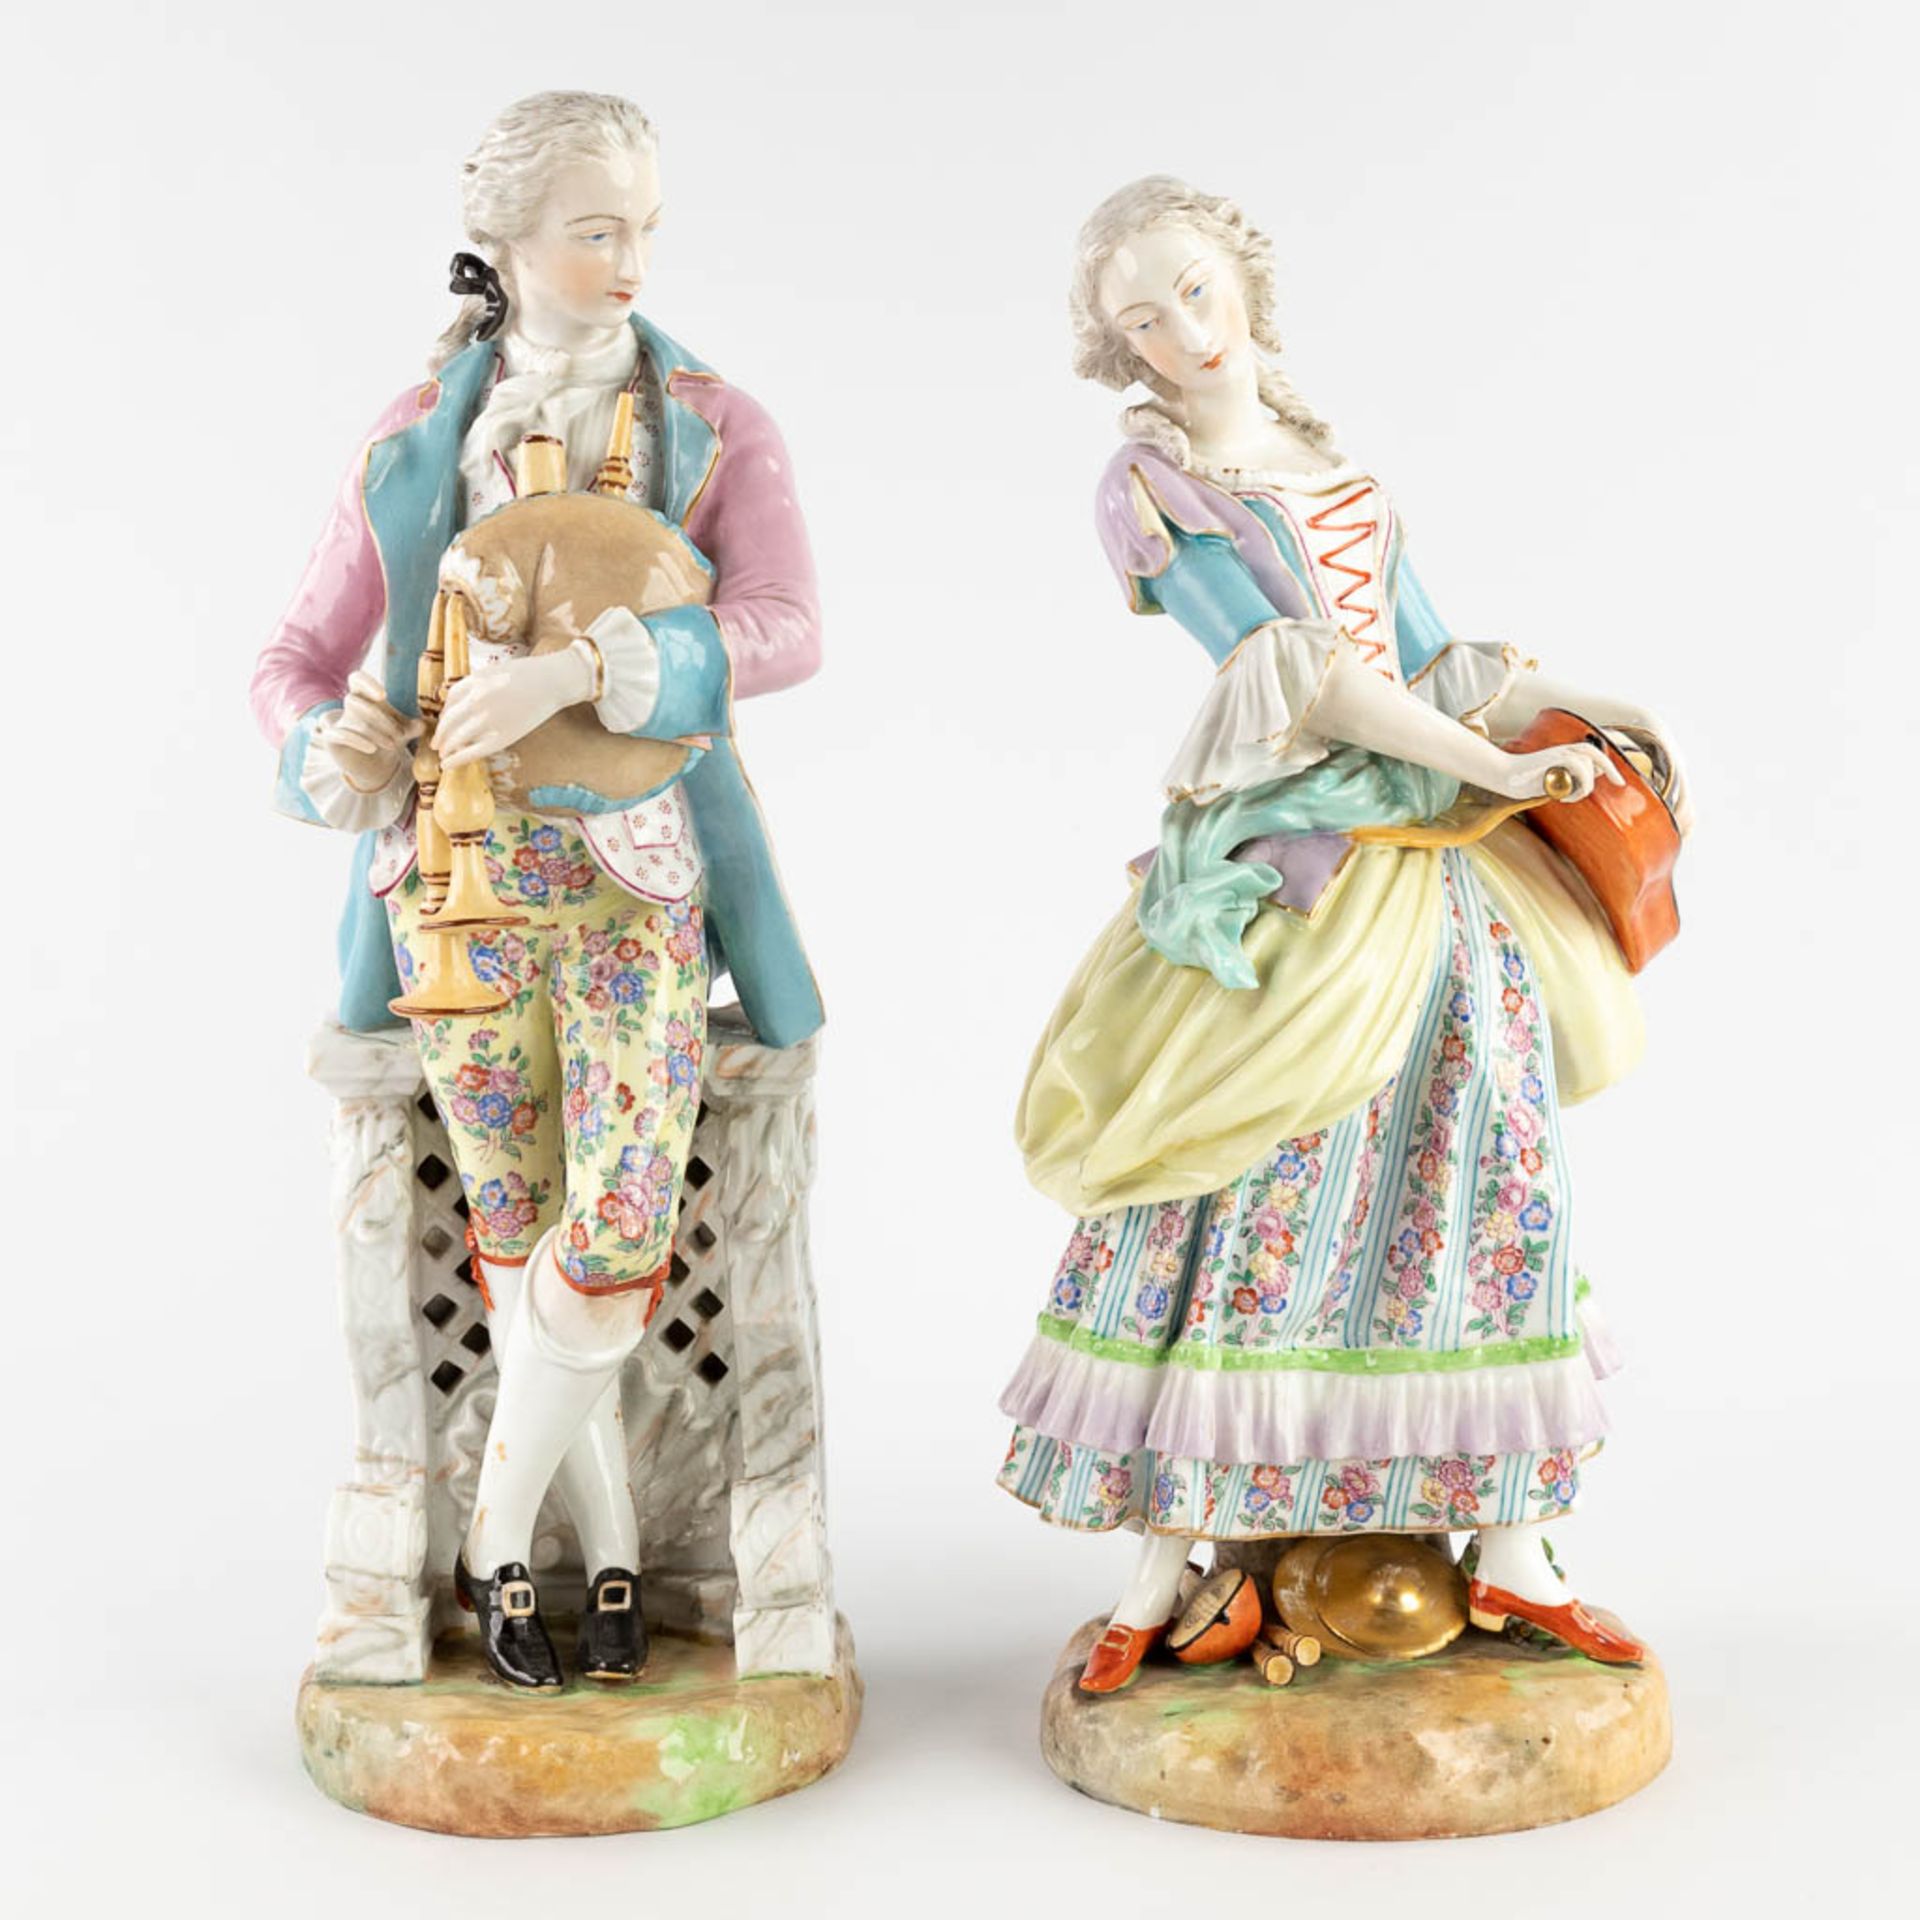 A pair of figurines 'Musical man and wife' Meissner marks, 18th/19th century. (L: 16 x W: 16,5 x H: